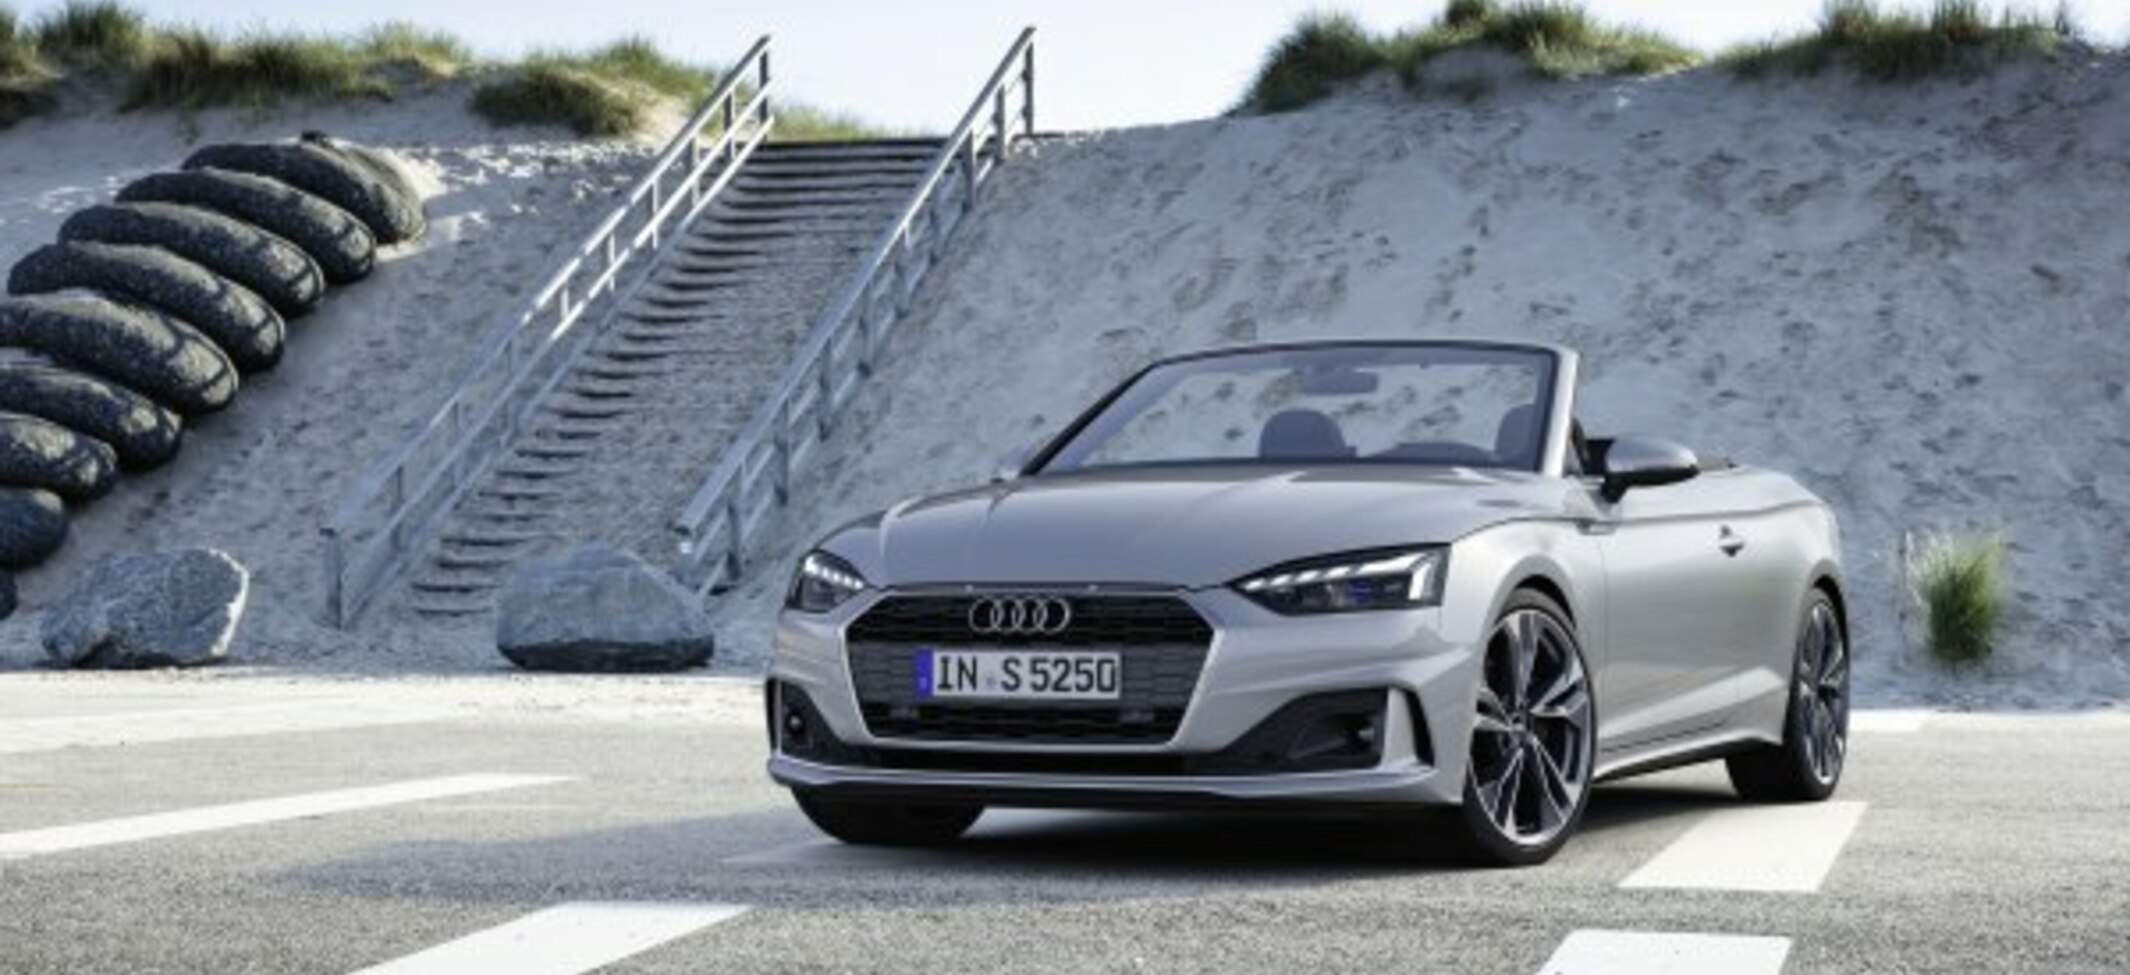 Audi A5 Cabriolet (F5, facelift 2019) 40 TFSI (204 Hp) MHEV S tronic 2020, 2021 